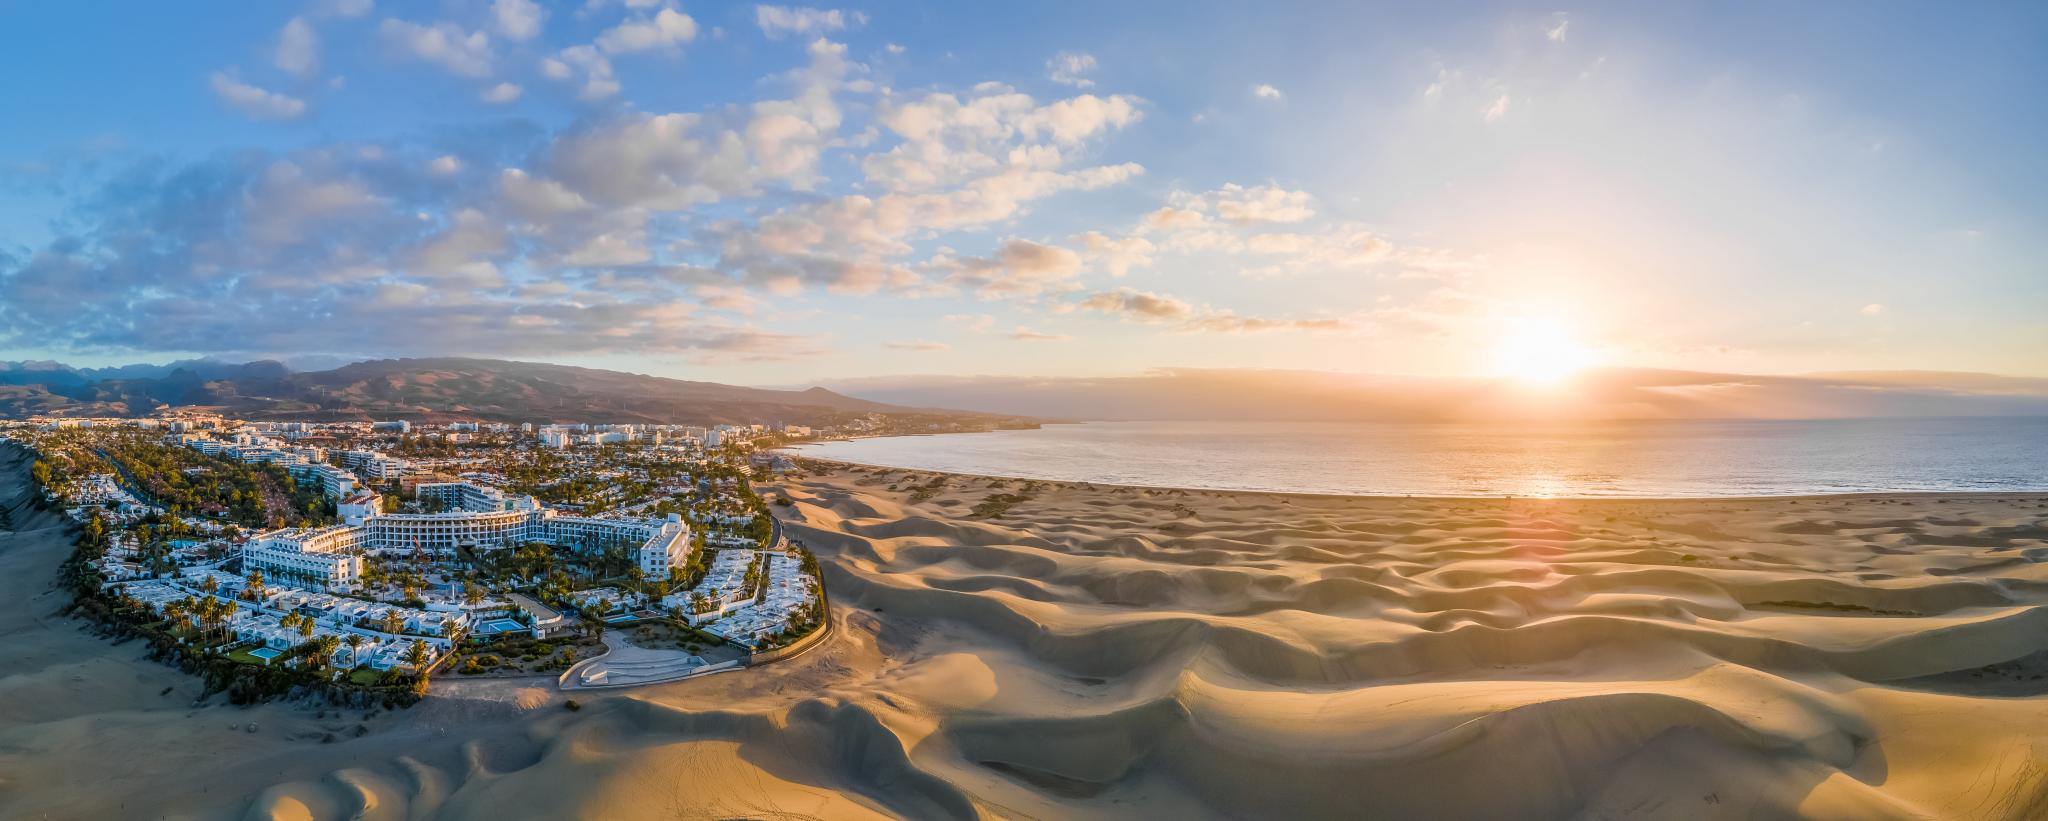 view from above of the dunes and beach of maspalomas